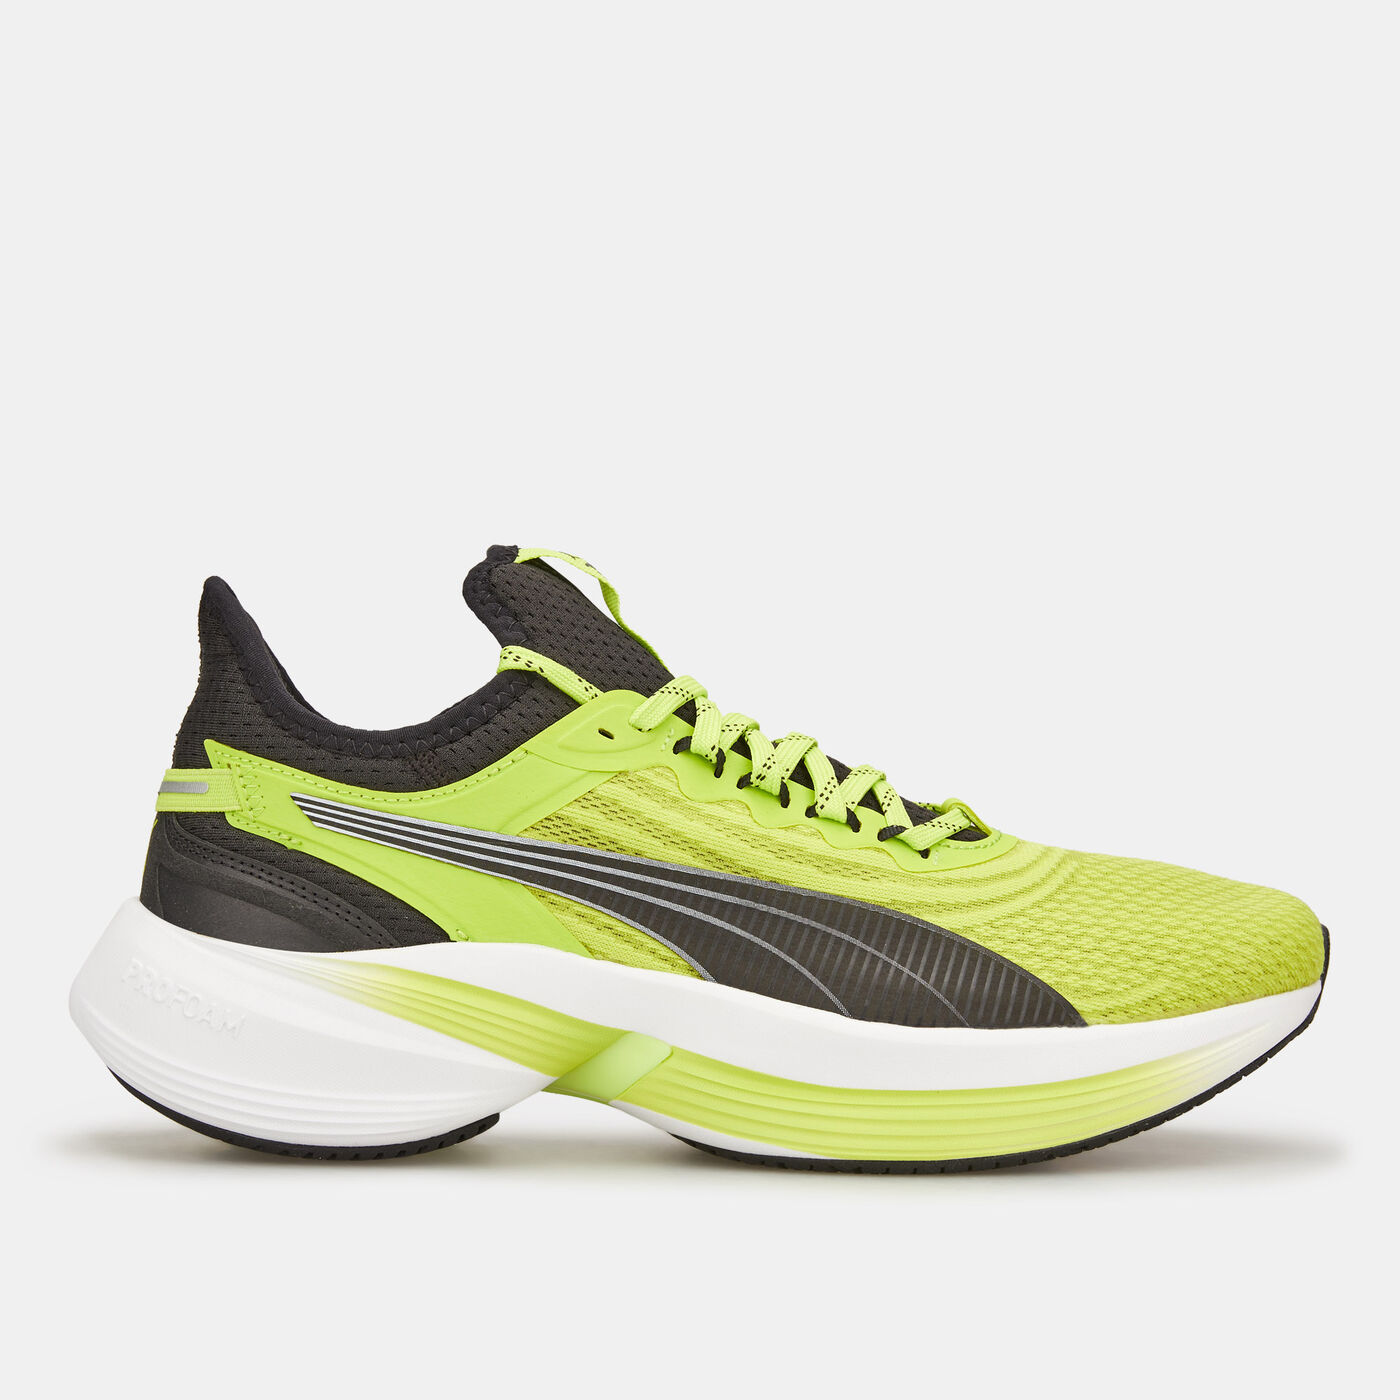 Men's Conduct Pro Running Shoes